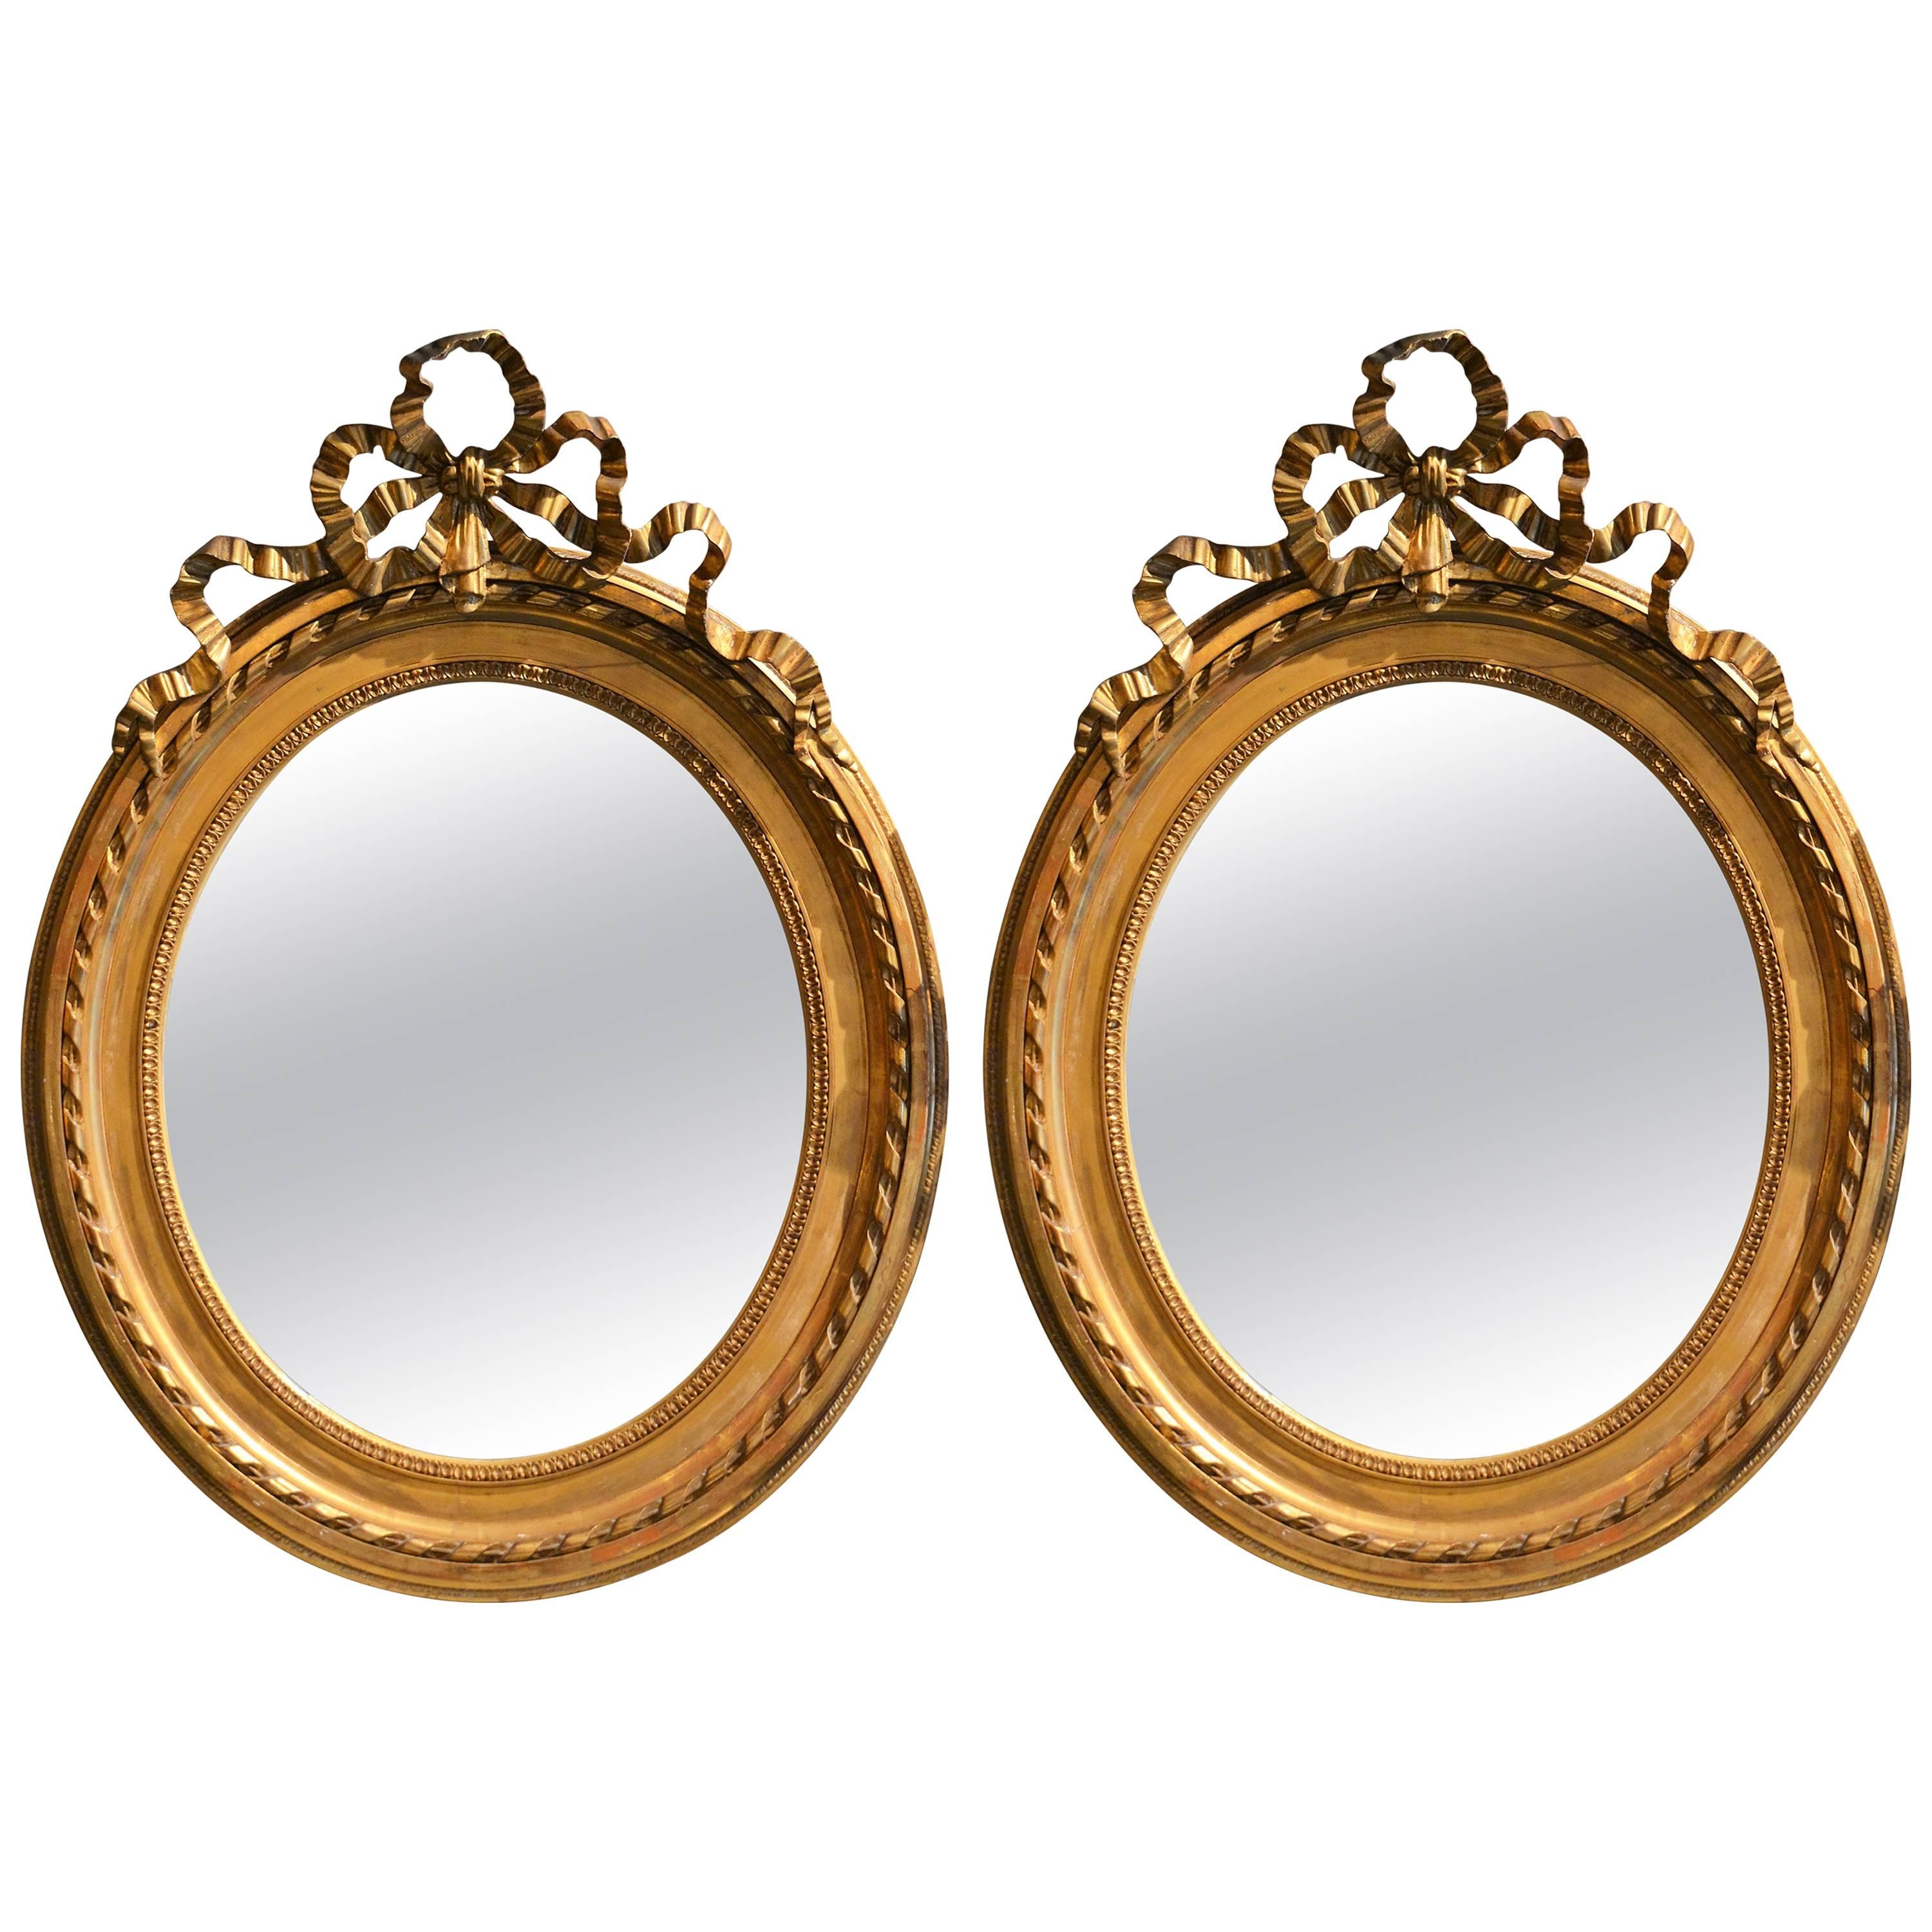 Pair of Antique French Louis XVI Oval Mirrors